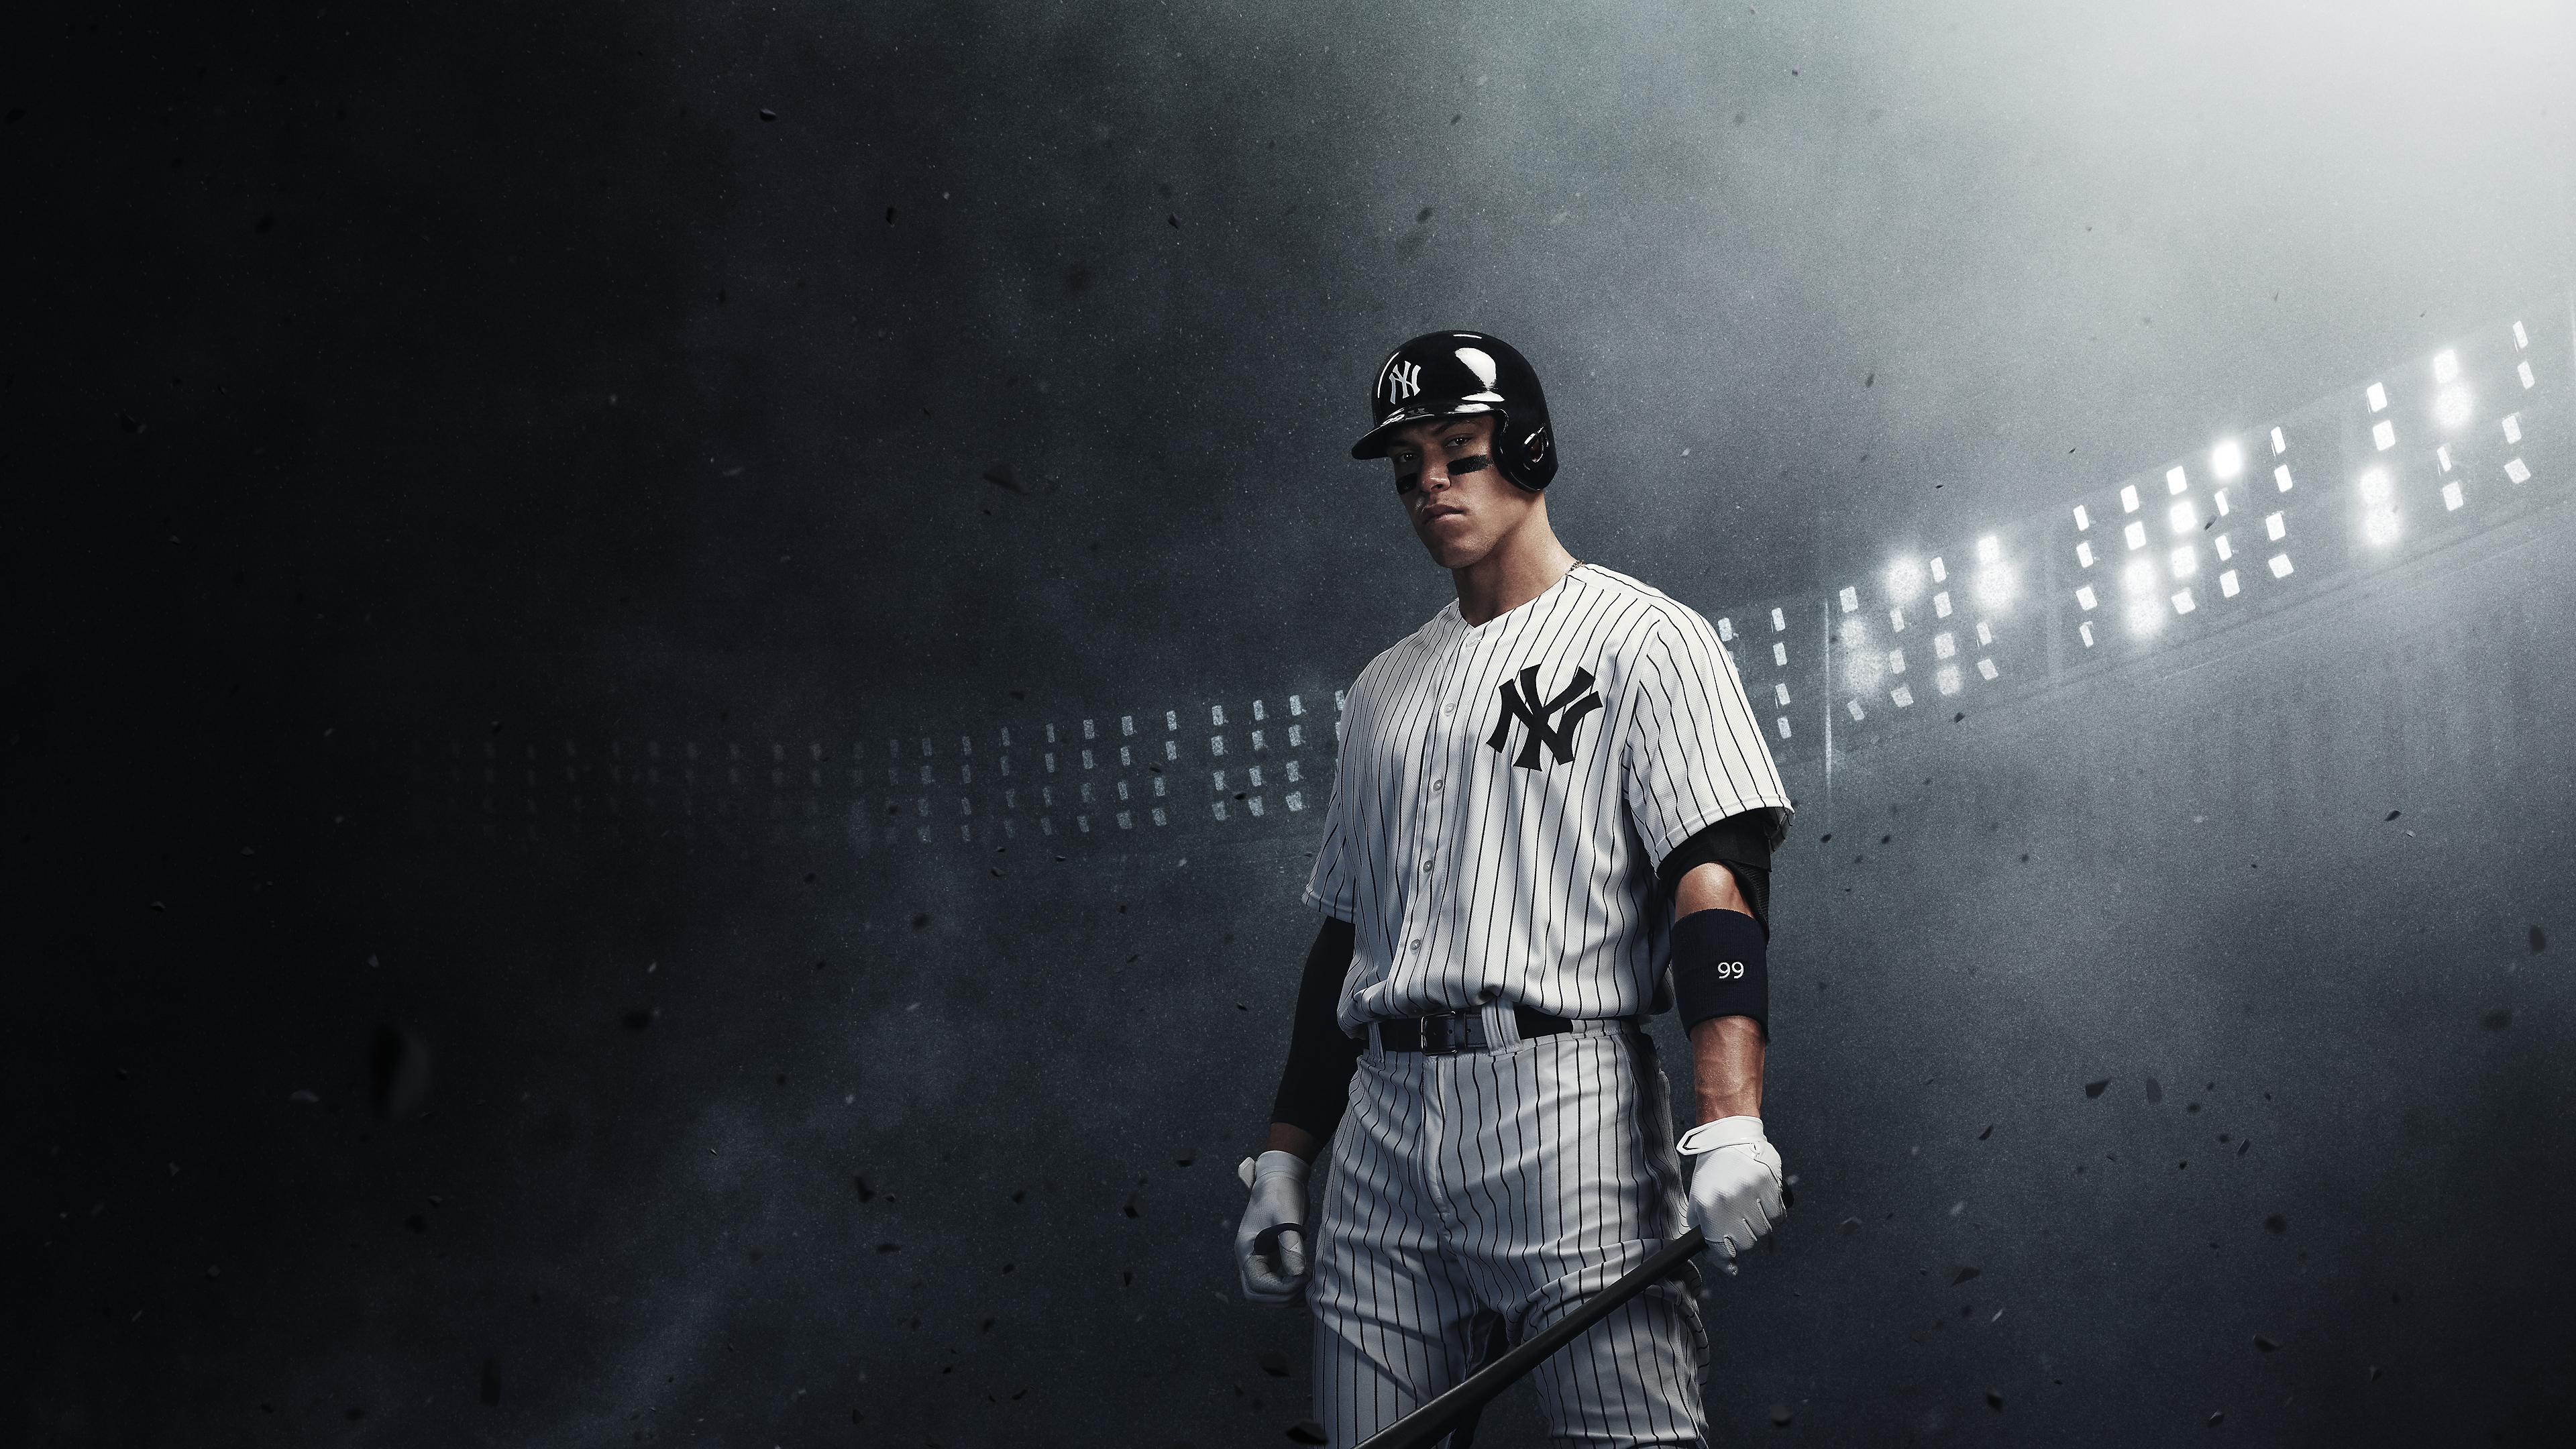 MLB The Show 18 cover art